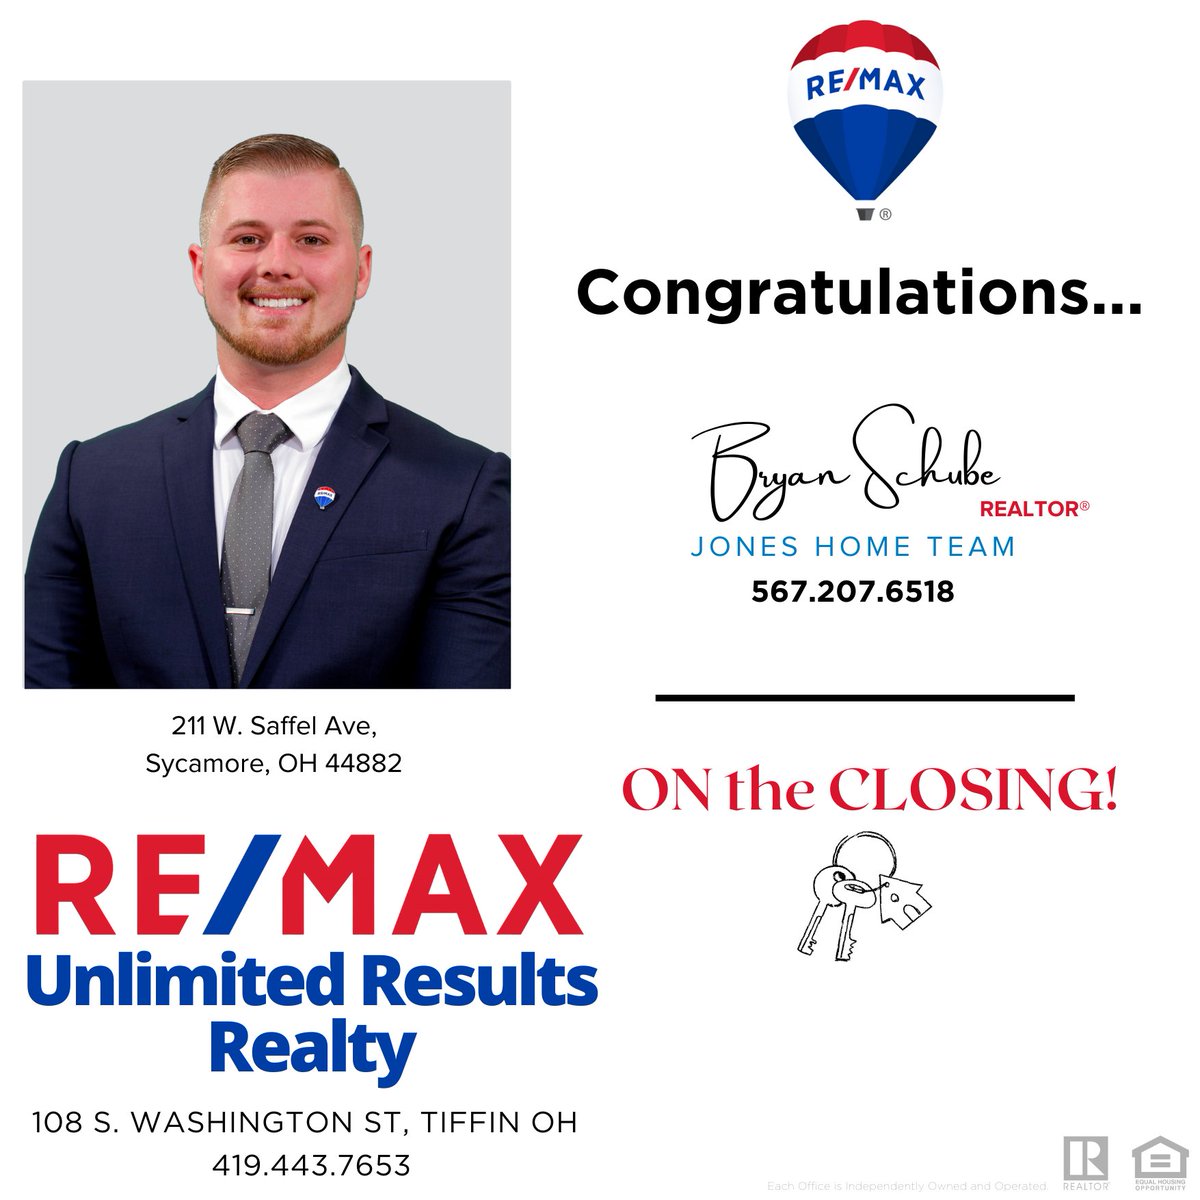 𝗖𝗼𝗻𝗴𝗿𝗮𝘁𝘂𝗹𝗮𝘁𝗶𝗼𝗻𝘀, 𝗕𝗿𝘆𝗮𝗻 on your CLOSING! 👏🎉🎊

If you are looking for an Agent to represent you, visit his website at: Bryan-Schube.Remax.com

#realestate #remax #remaxagent #CMN #northwestohio #ohiorealestate #sold #closing